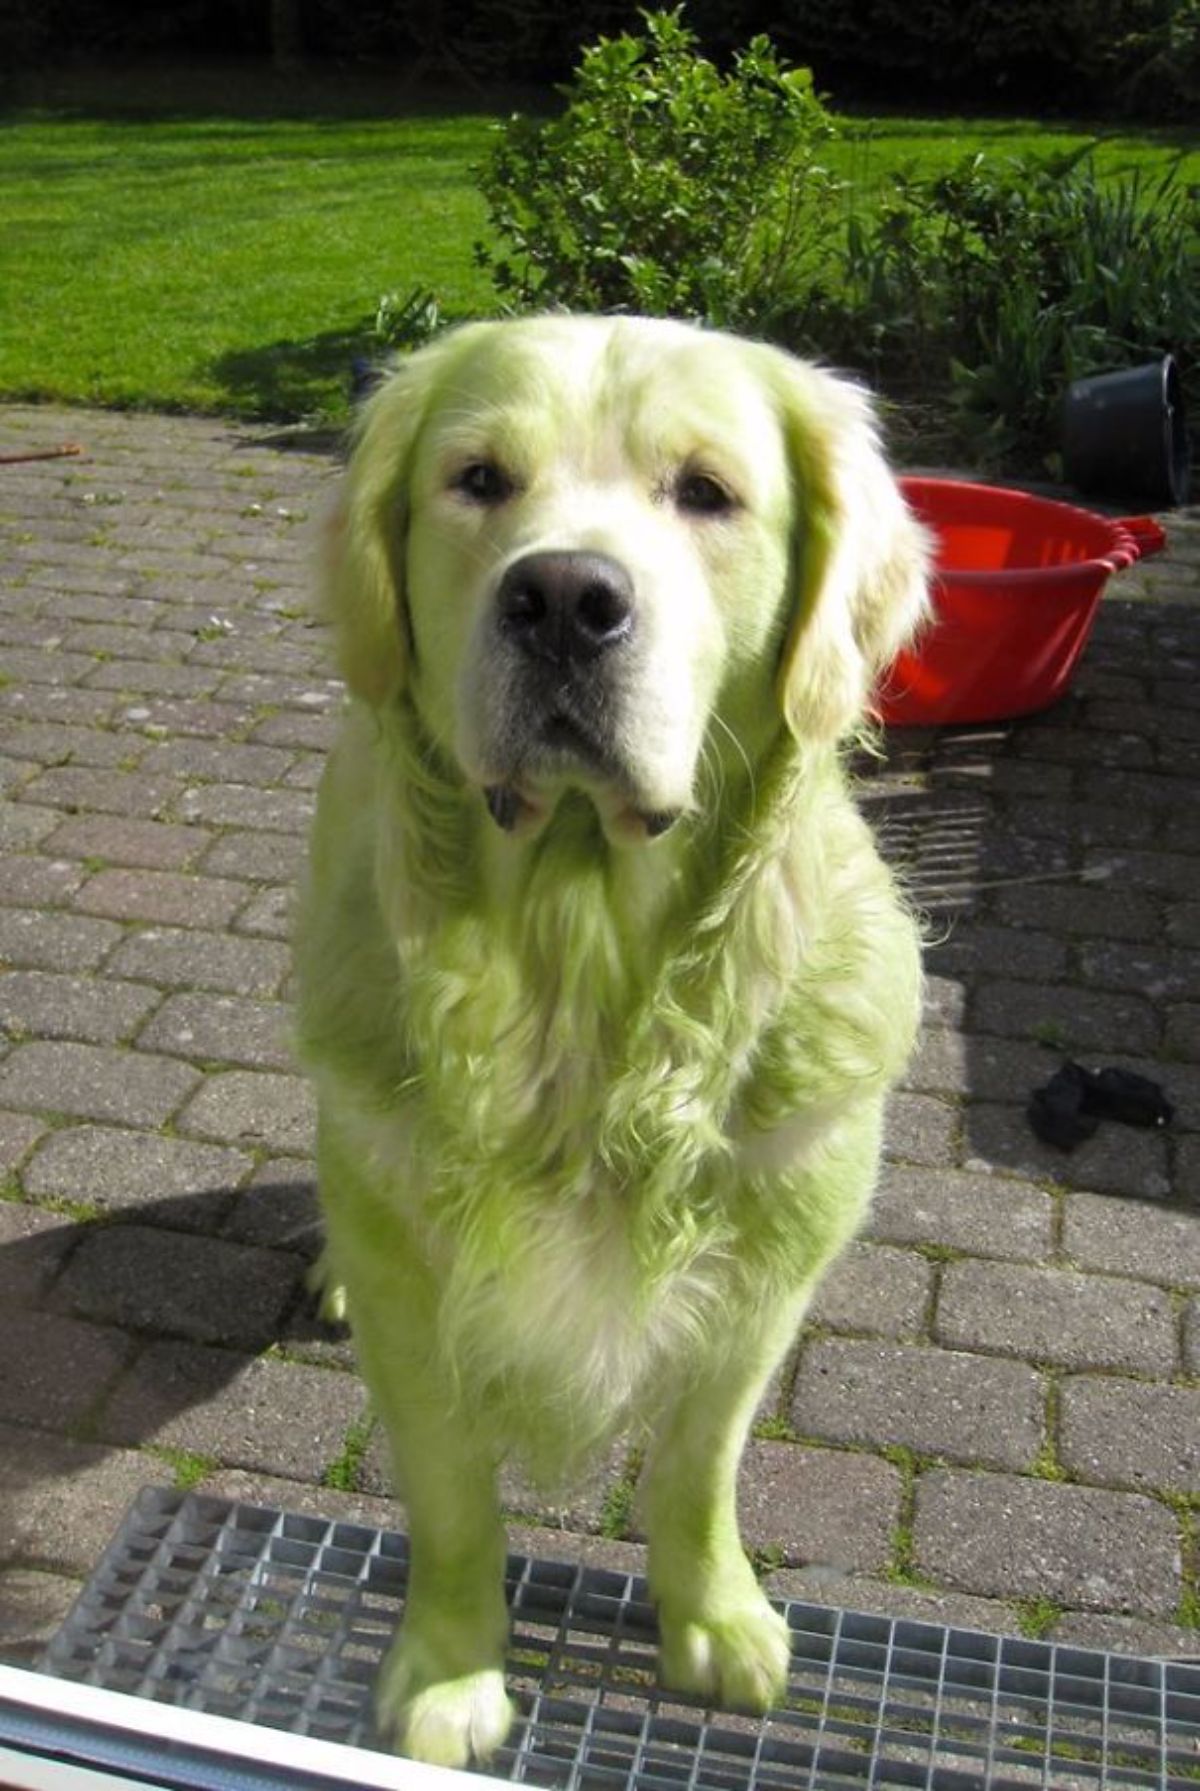 golden retriever sitting in a garden and the dog's fur is green